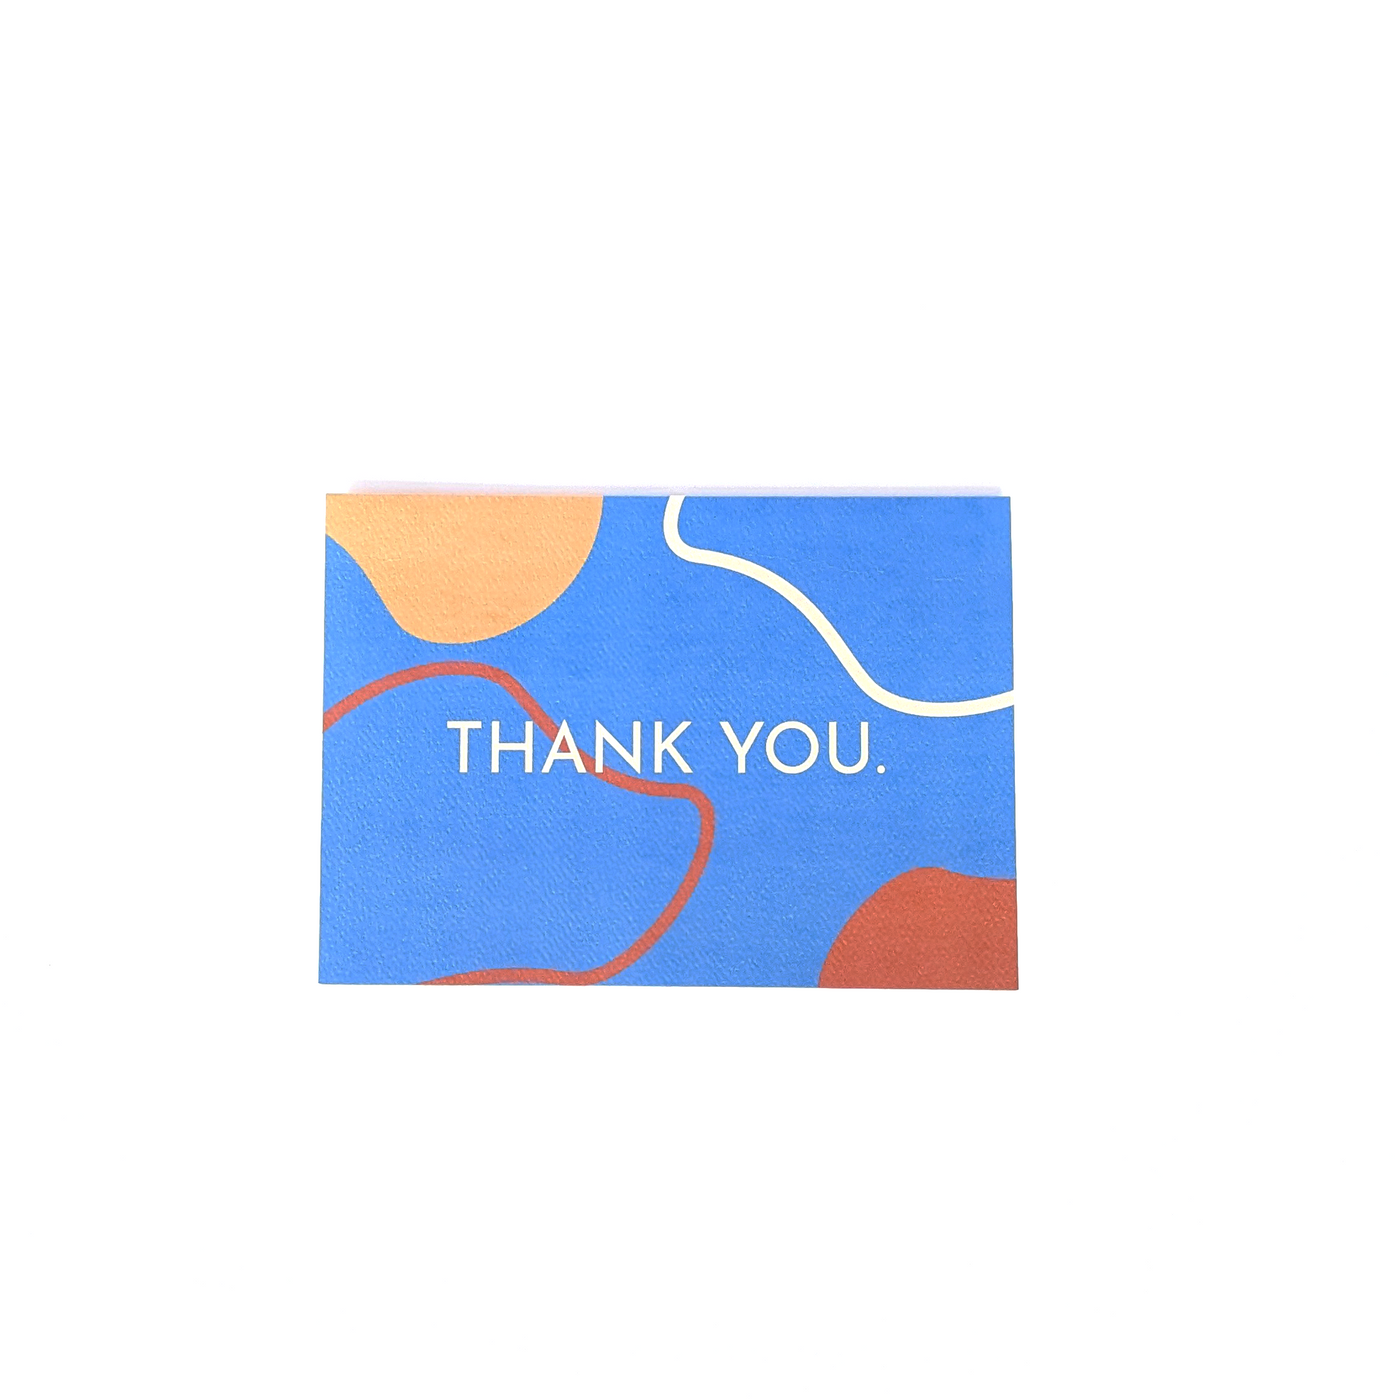 blue "Retro Thank You Card" with an abstract illustration that reads "Thank You" in white text and simple font